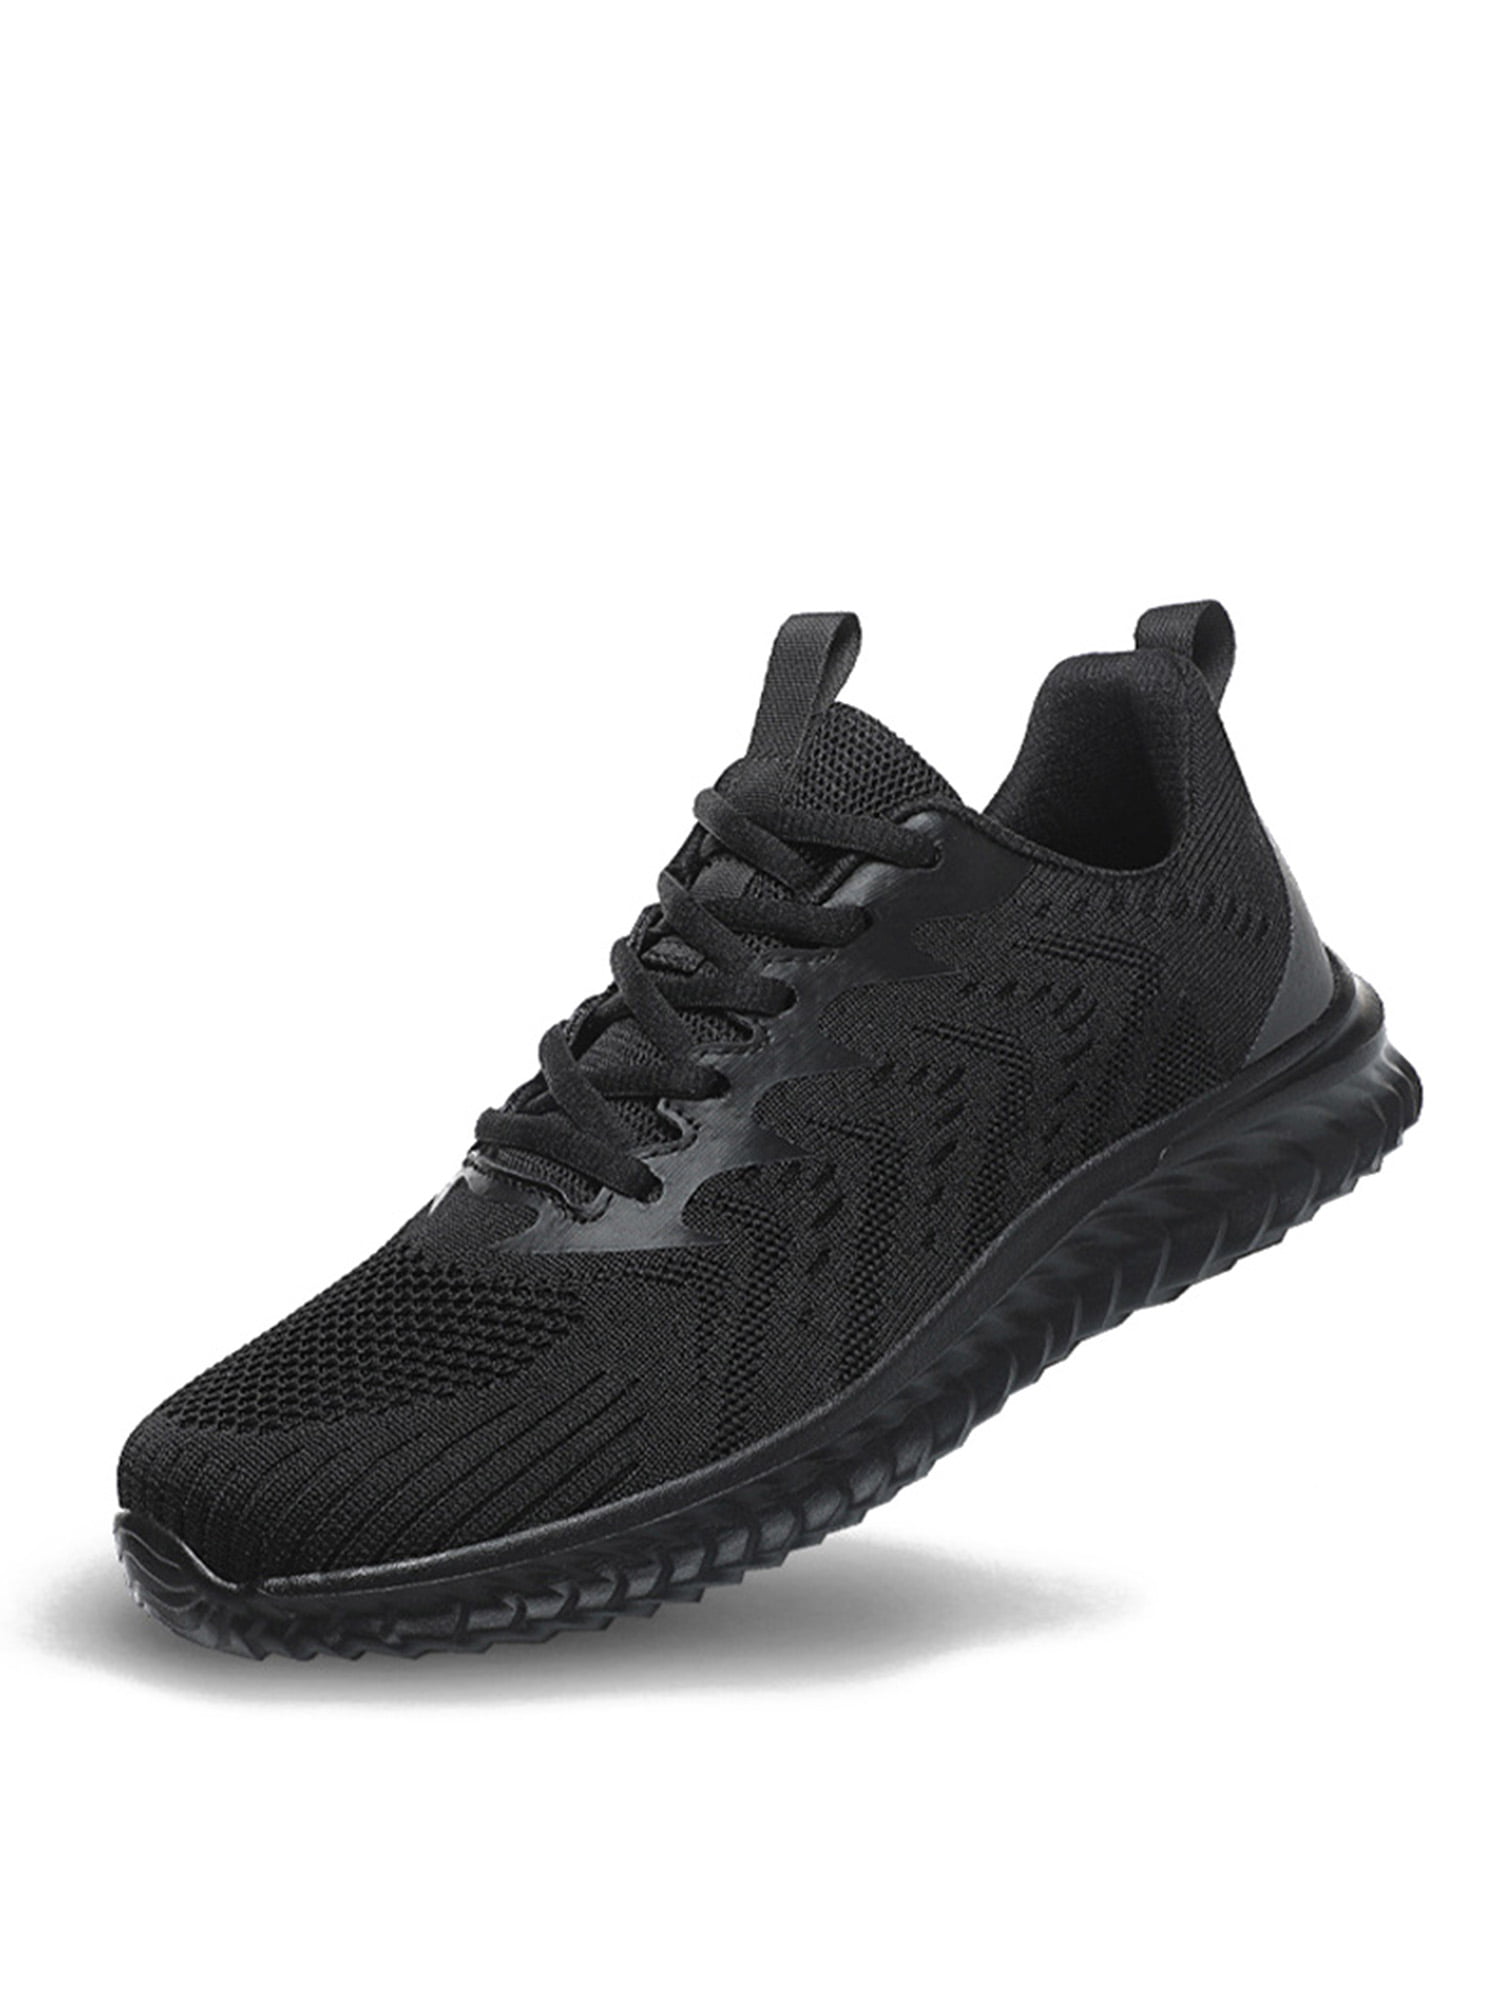 Mens Boys Trainers Black Casual Running Gym Fitness Sports Shoes 